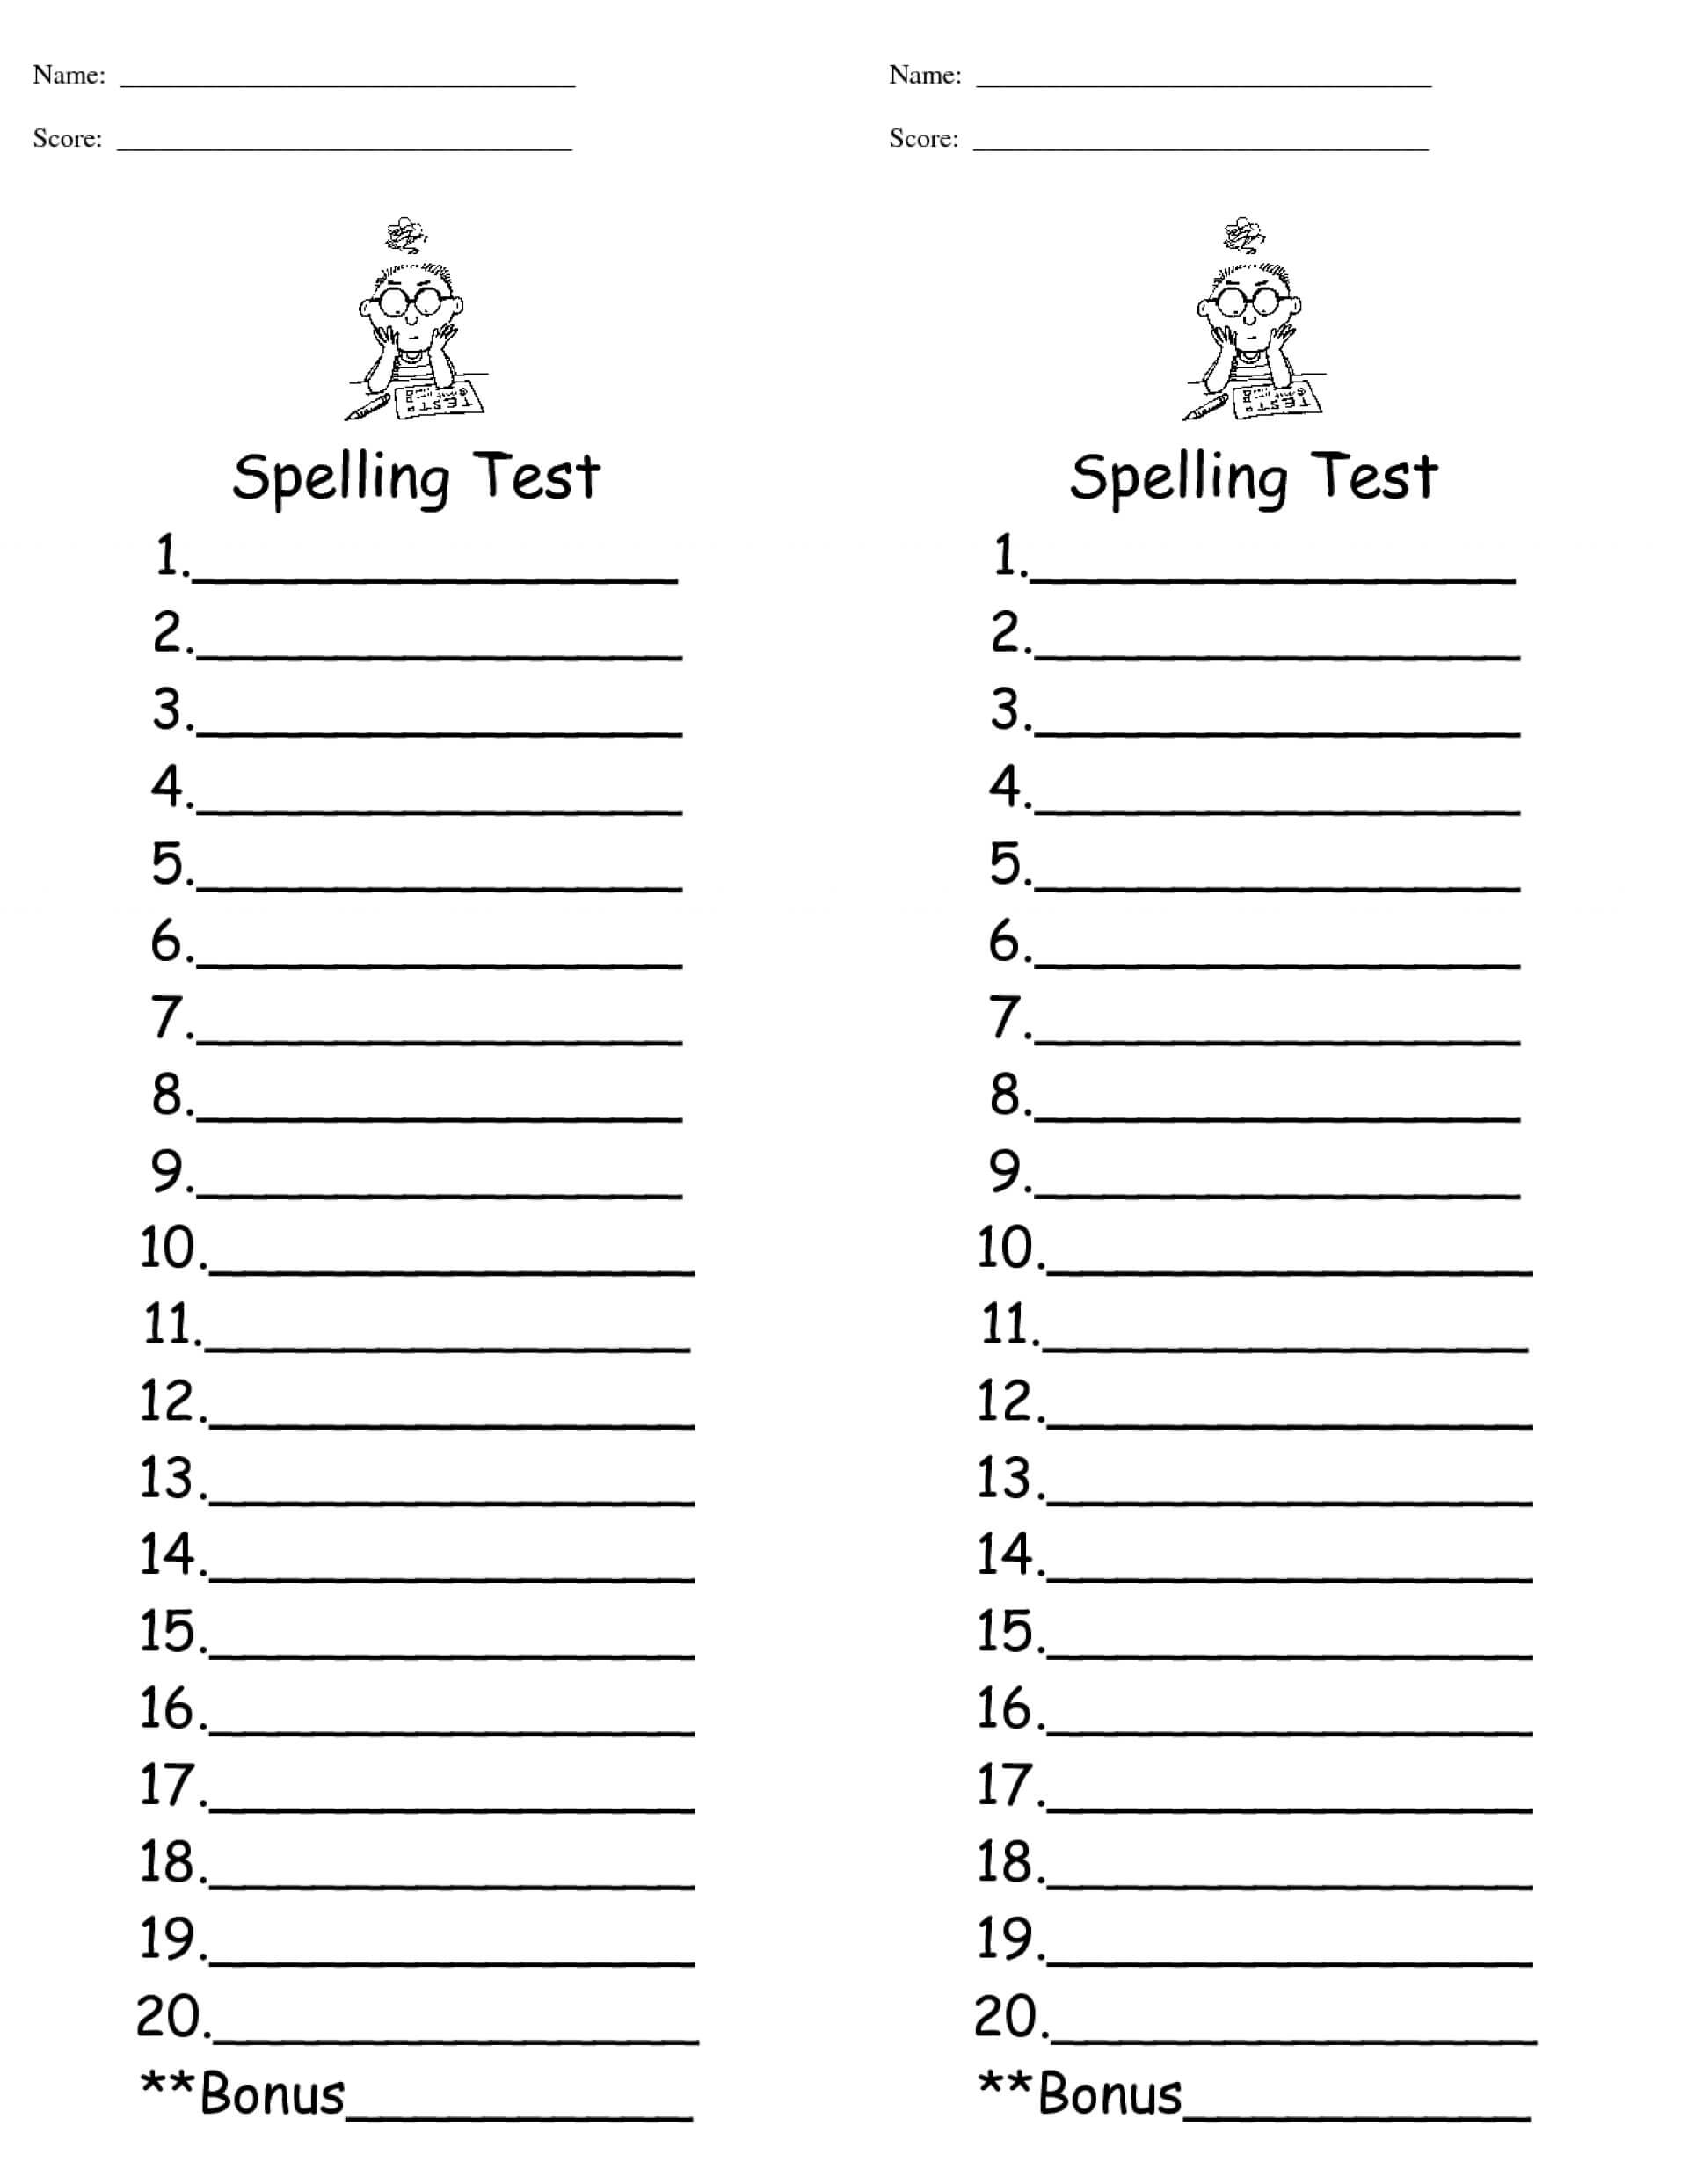 006 Printable Word Spelling Test Template Wondrous 20 Words In Test Template For Word